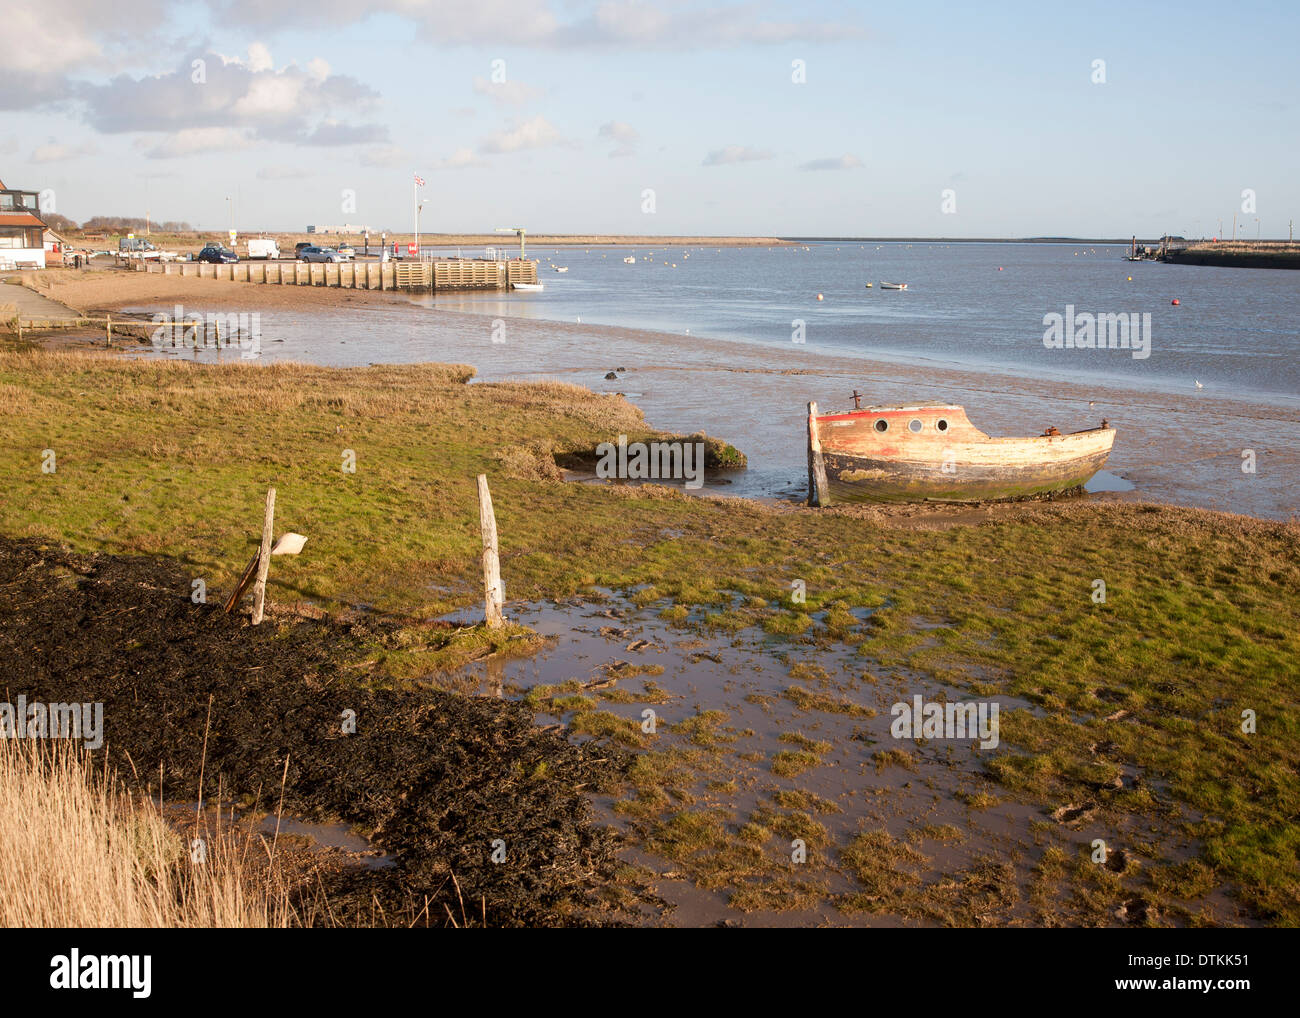 Abandoned old wooden boat rotting on the shoreline on the River Ore at Orford, Suffolk, England Stock Photo